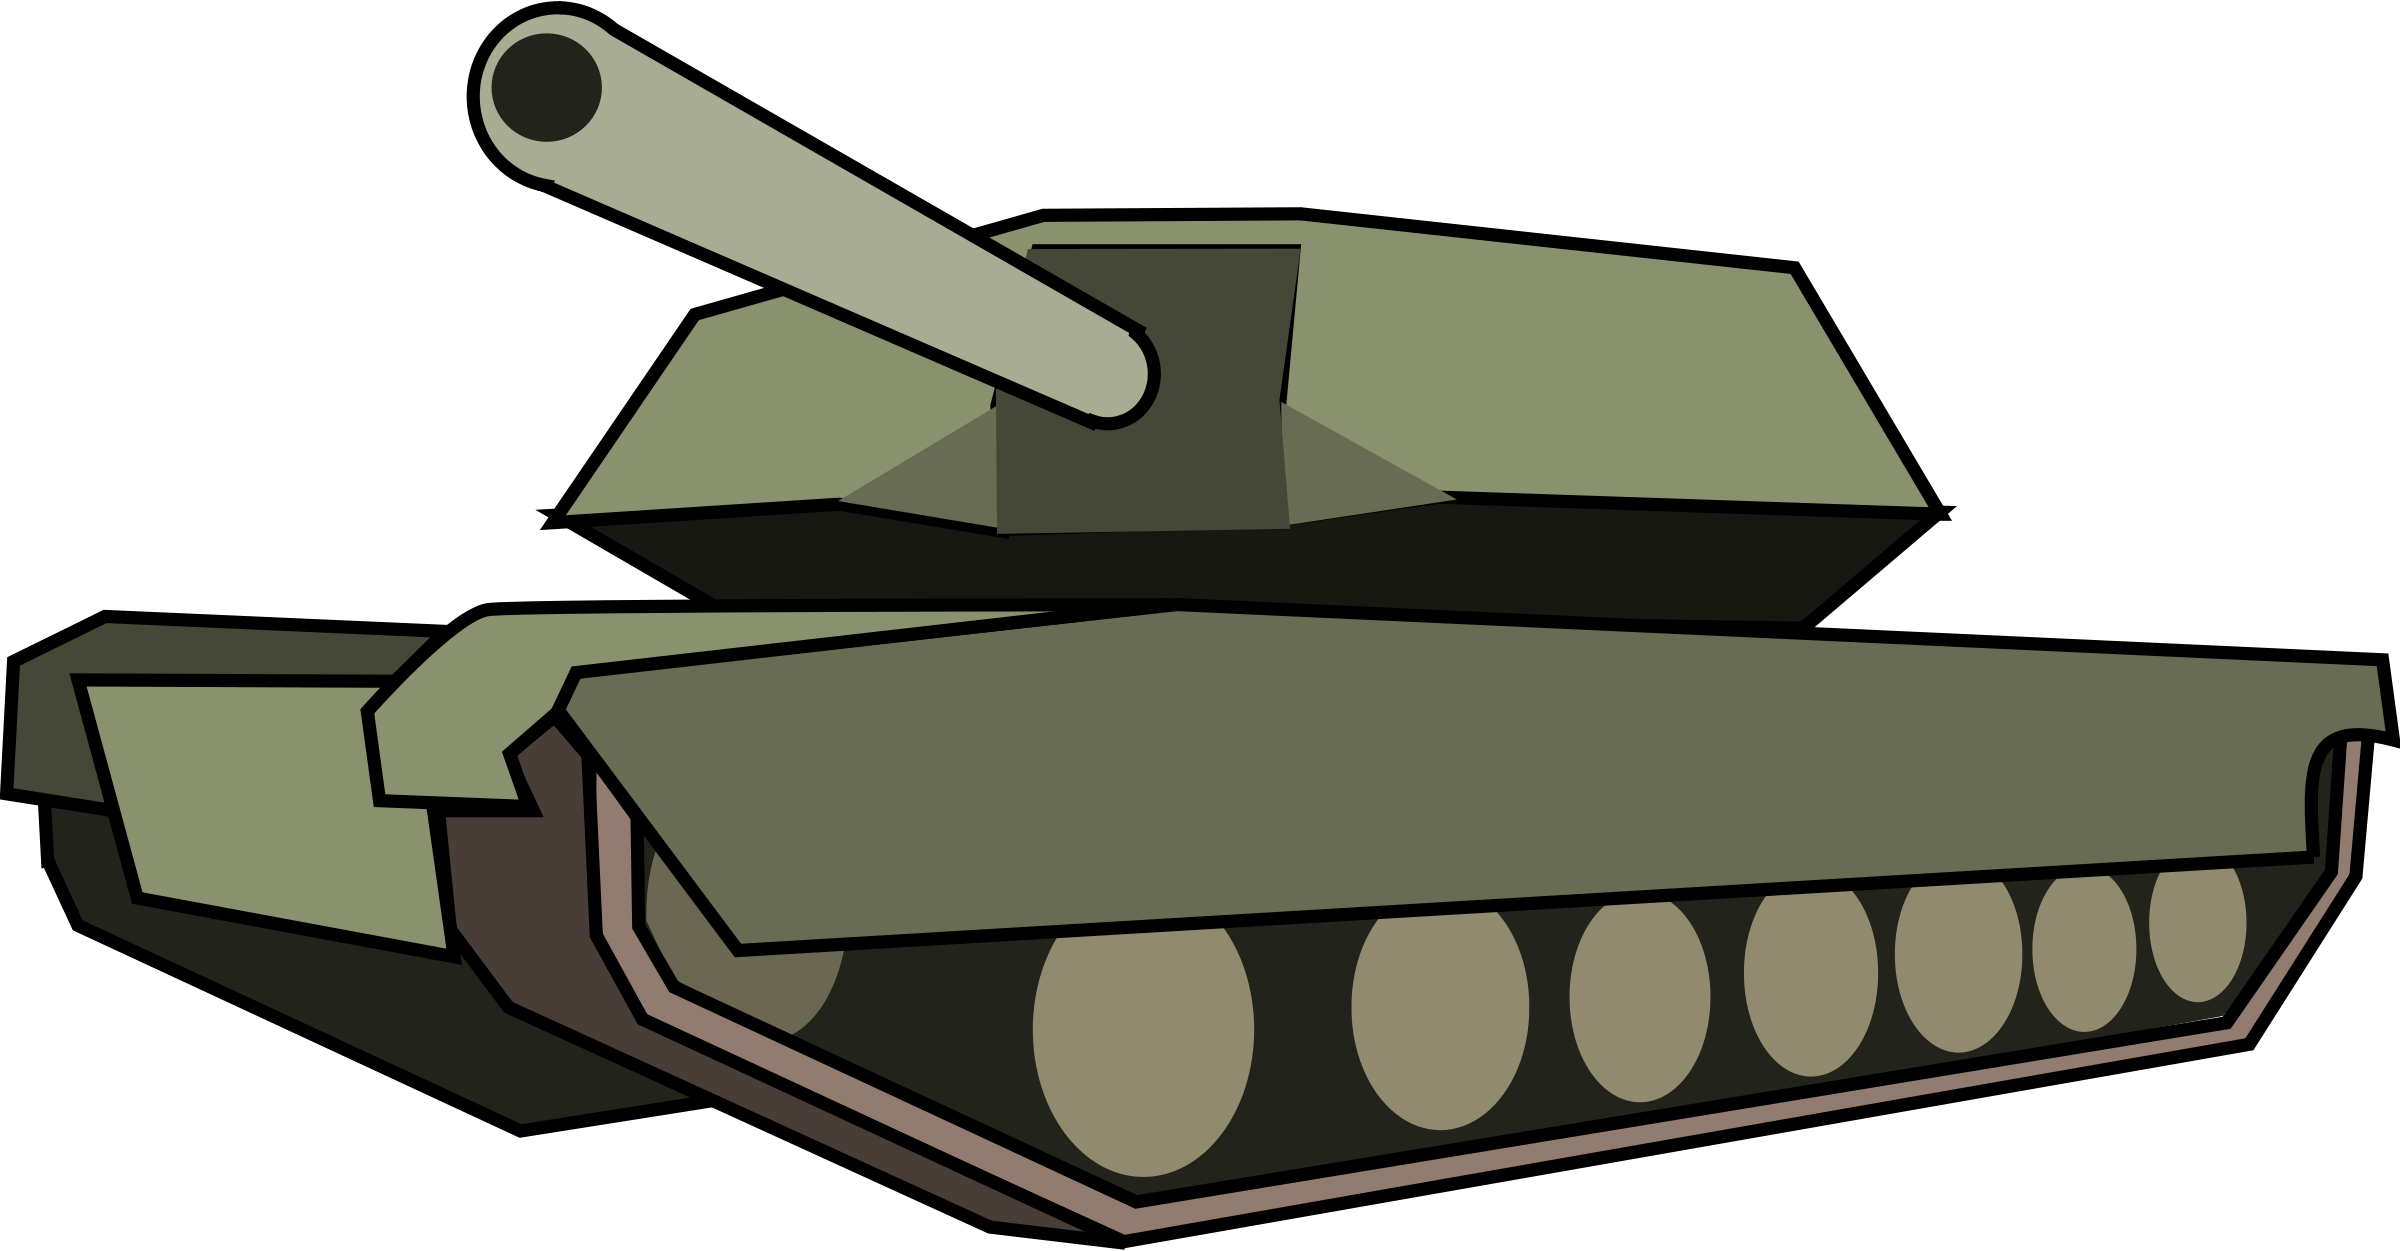 red tank military drawing